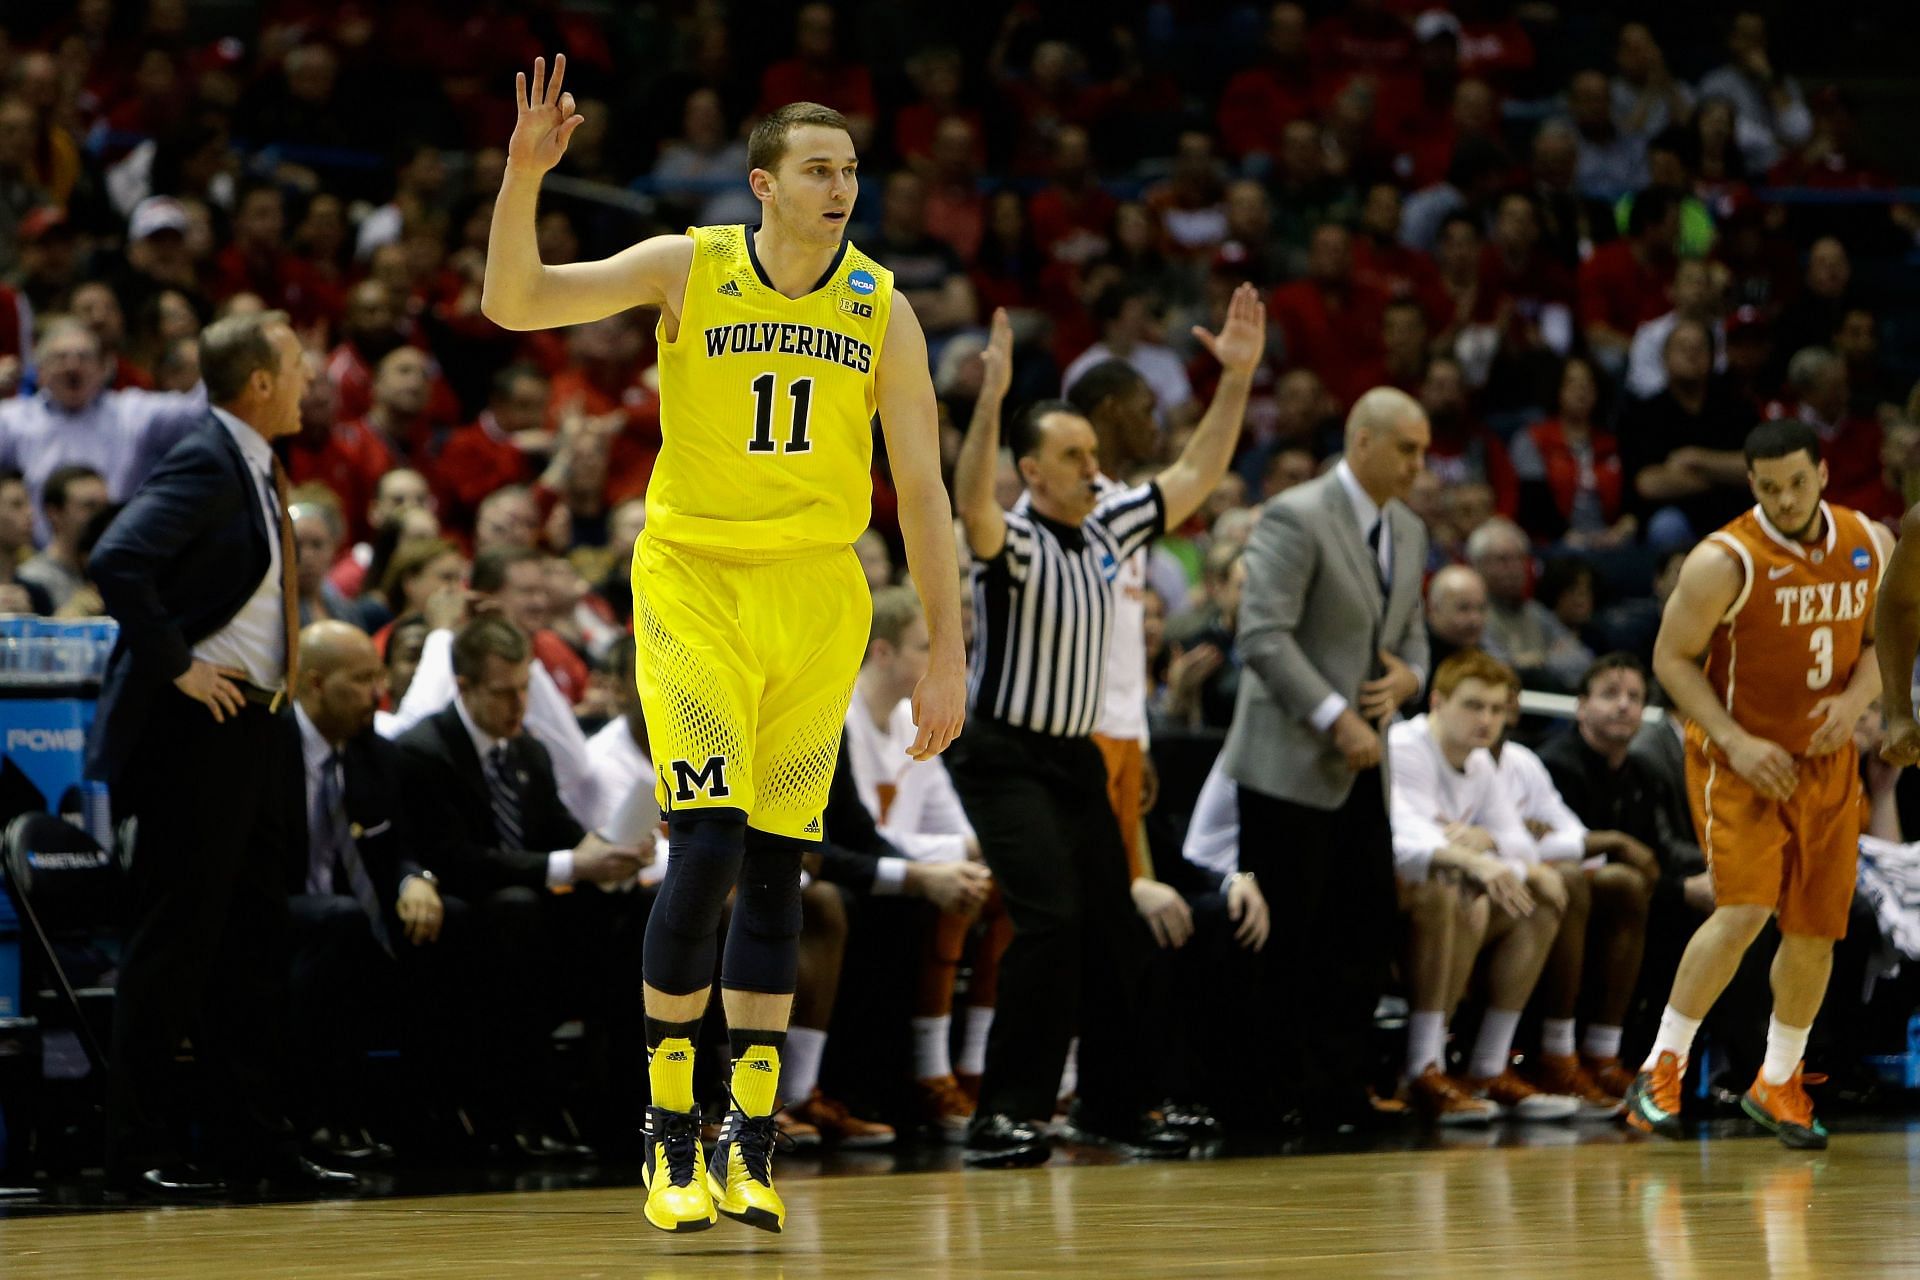 Nik Stauskas playing for the Wolverines